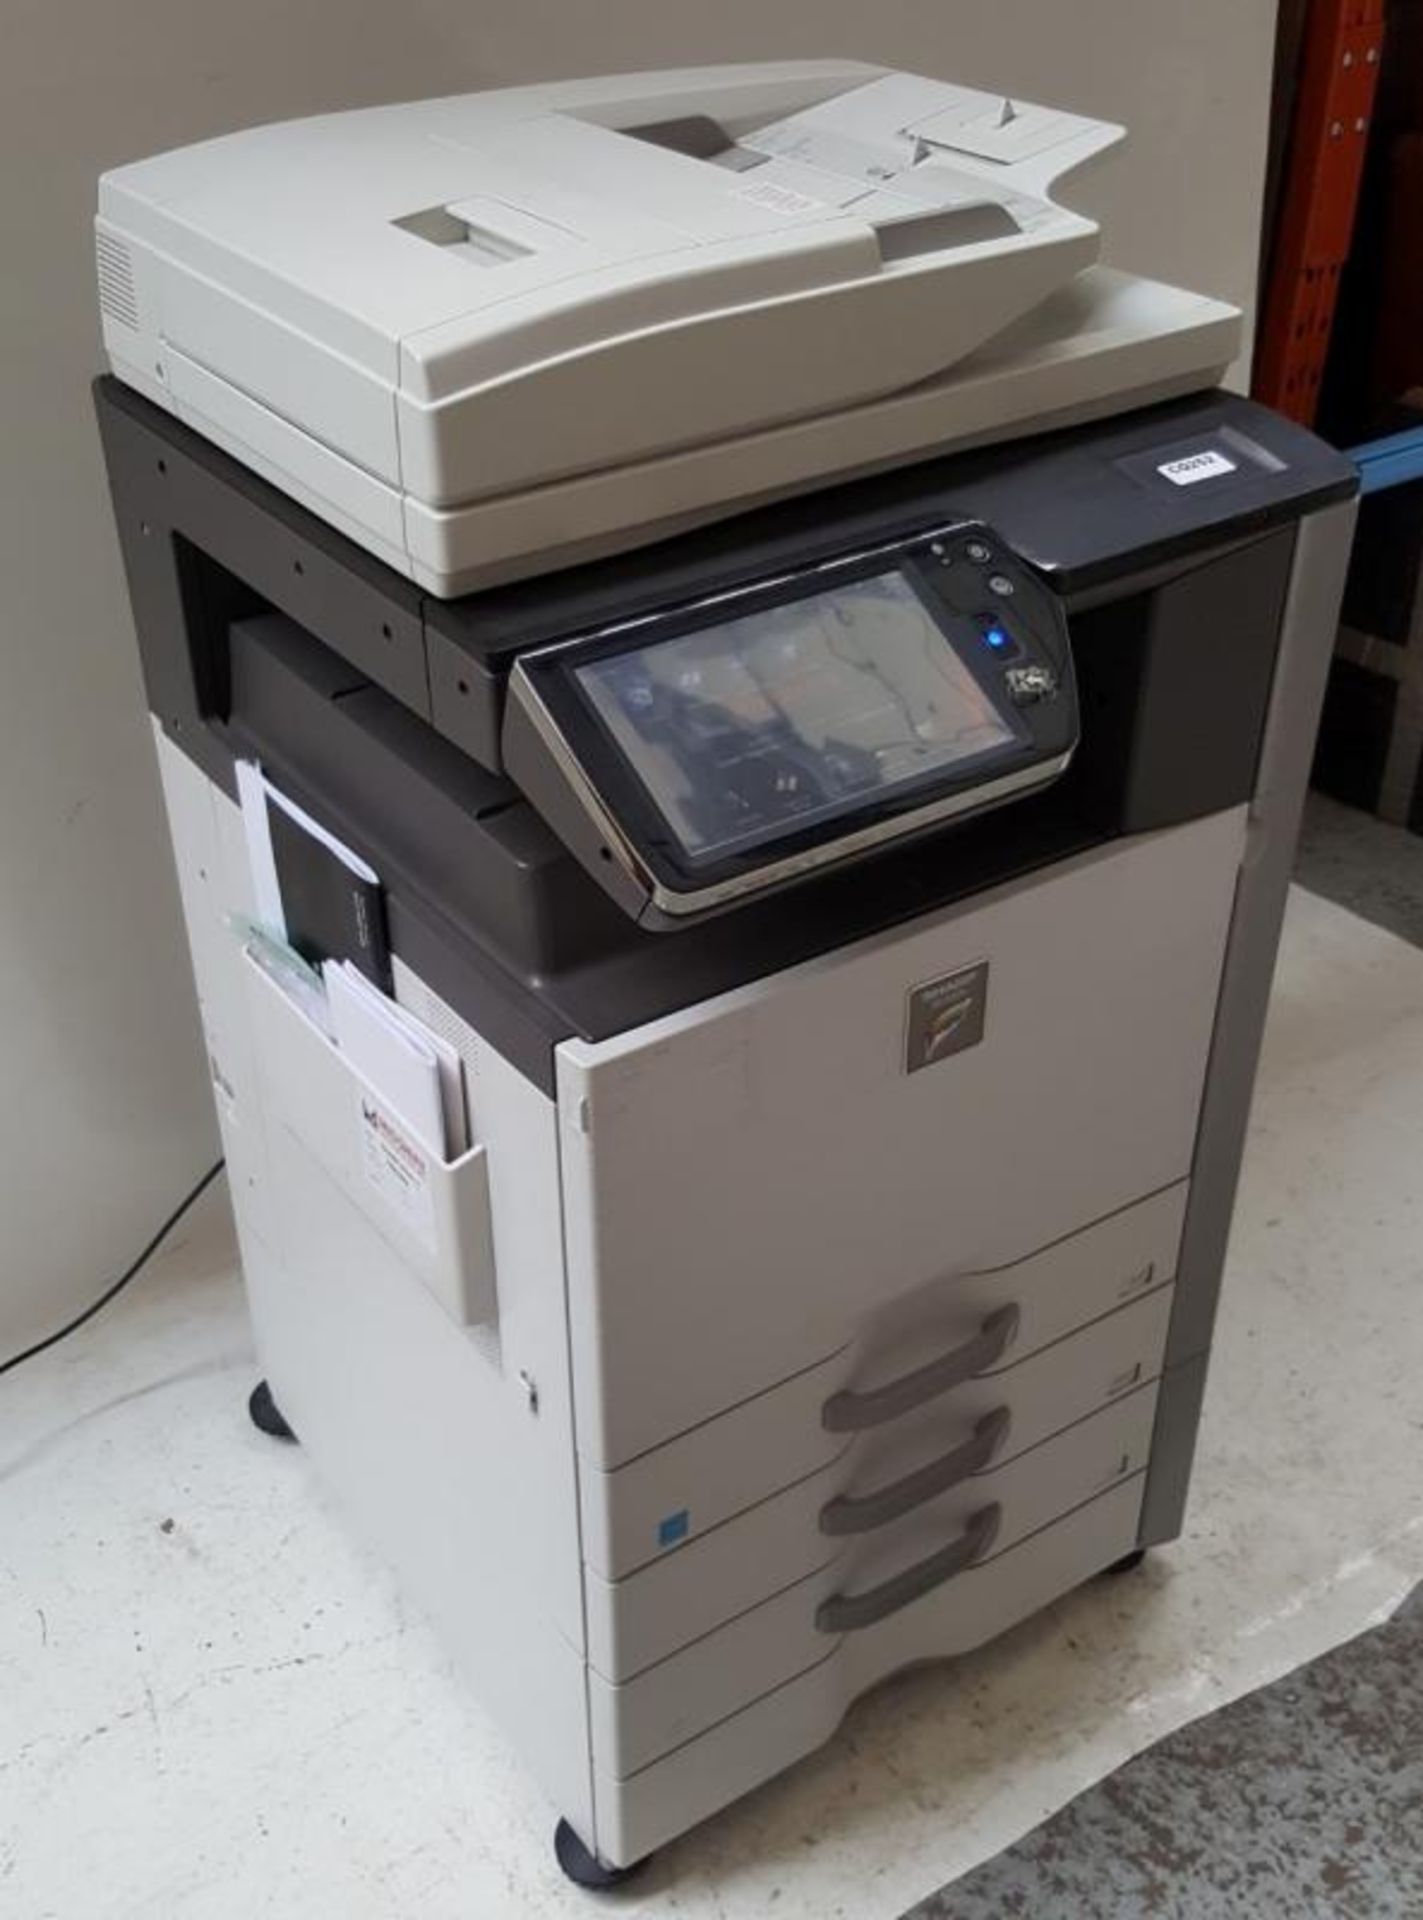 1 x Sharp MX-4112N Laser Office Printer Multifunction Device Copier Scanner (Has Come Out Of A Wor - Image 2 of 7